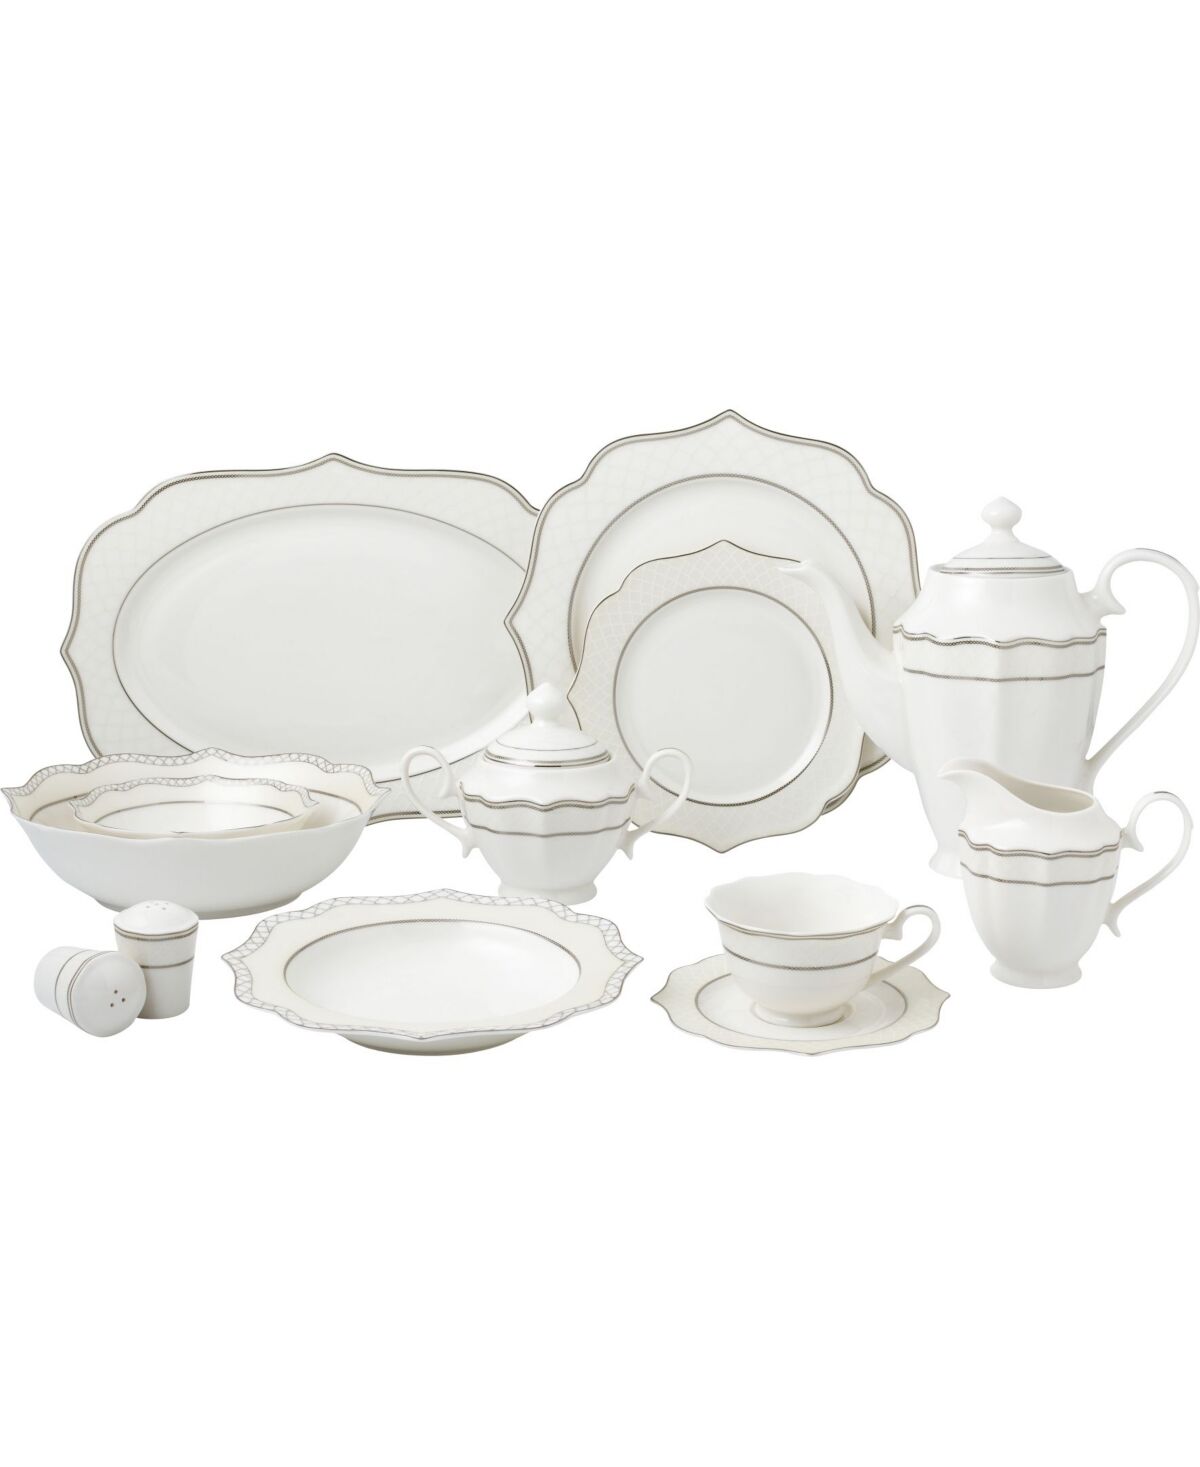 Lorren Home Trends 57 Piece Mix and Match Bone China Dinnerware Set, Service for 8 - Silver-Tone